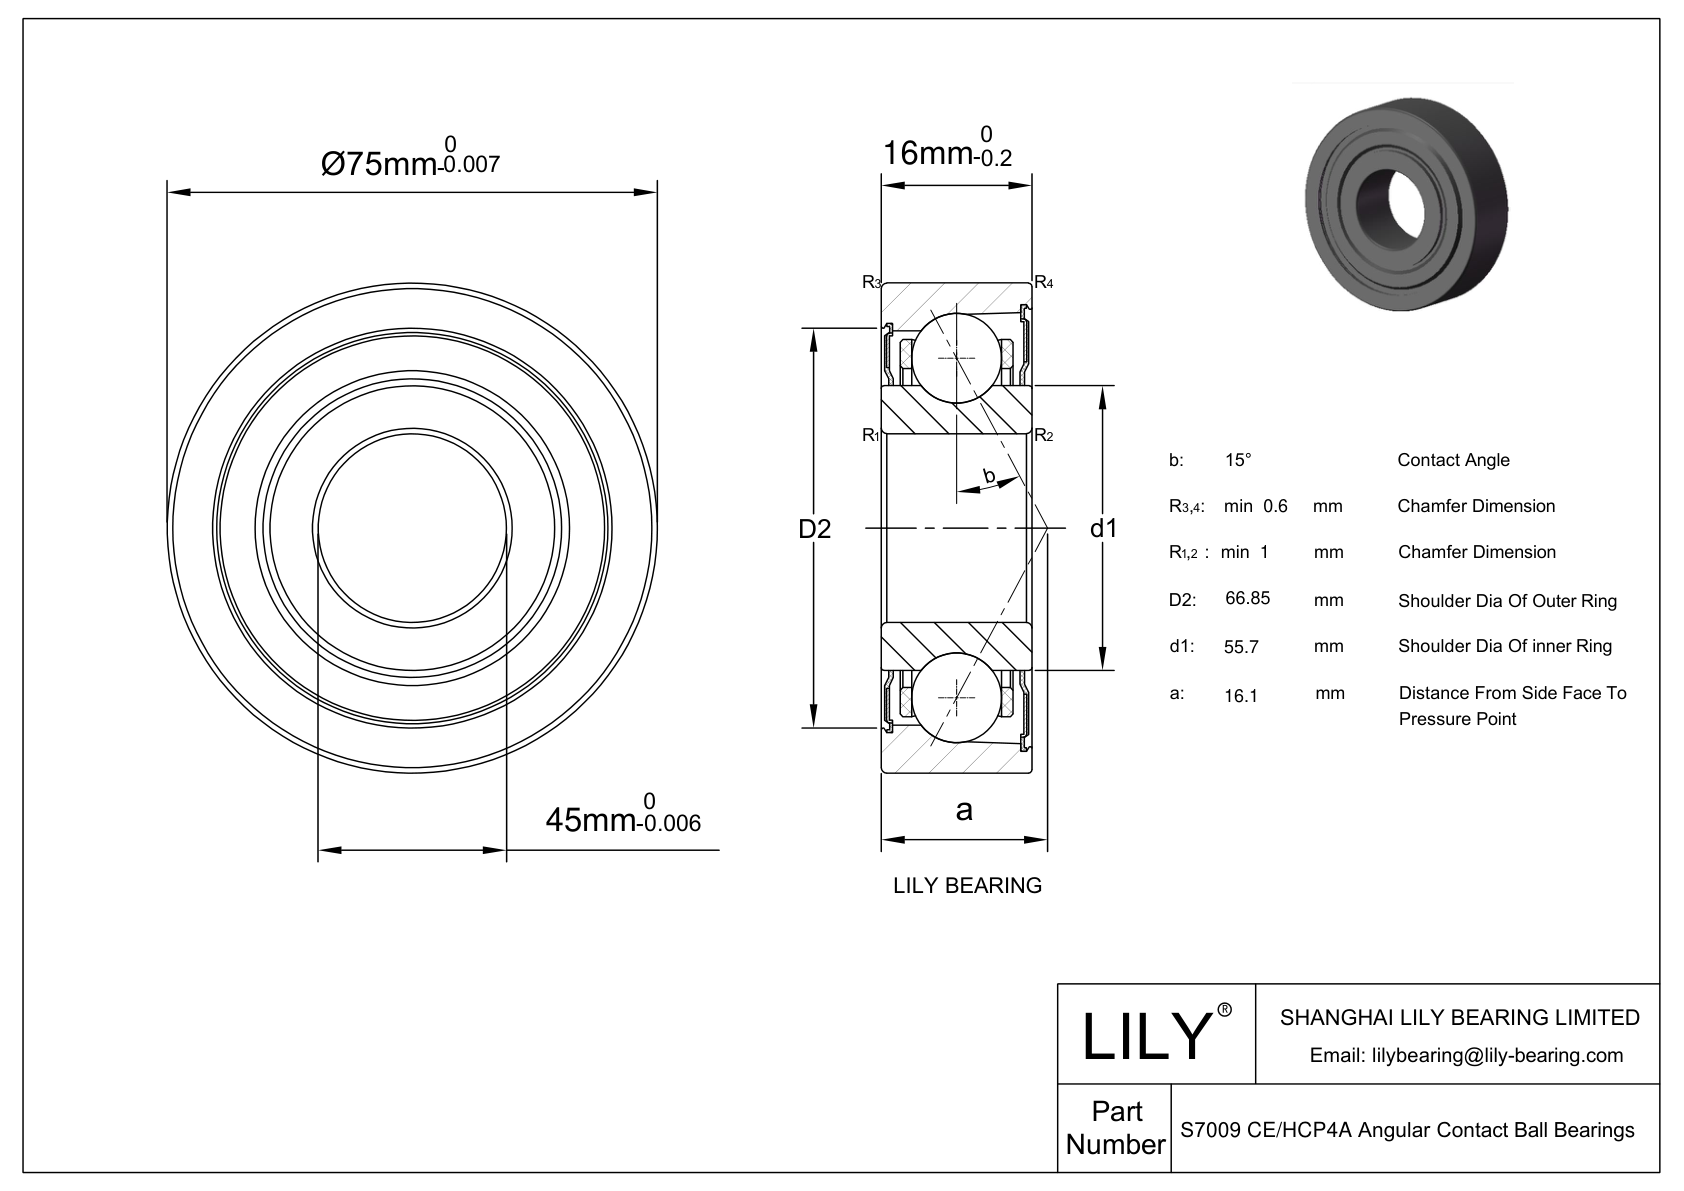 S7009 CE/HCP4A Super Precision Angular Contact Ball Bearings cad drawing